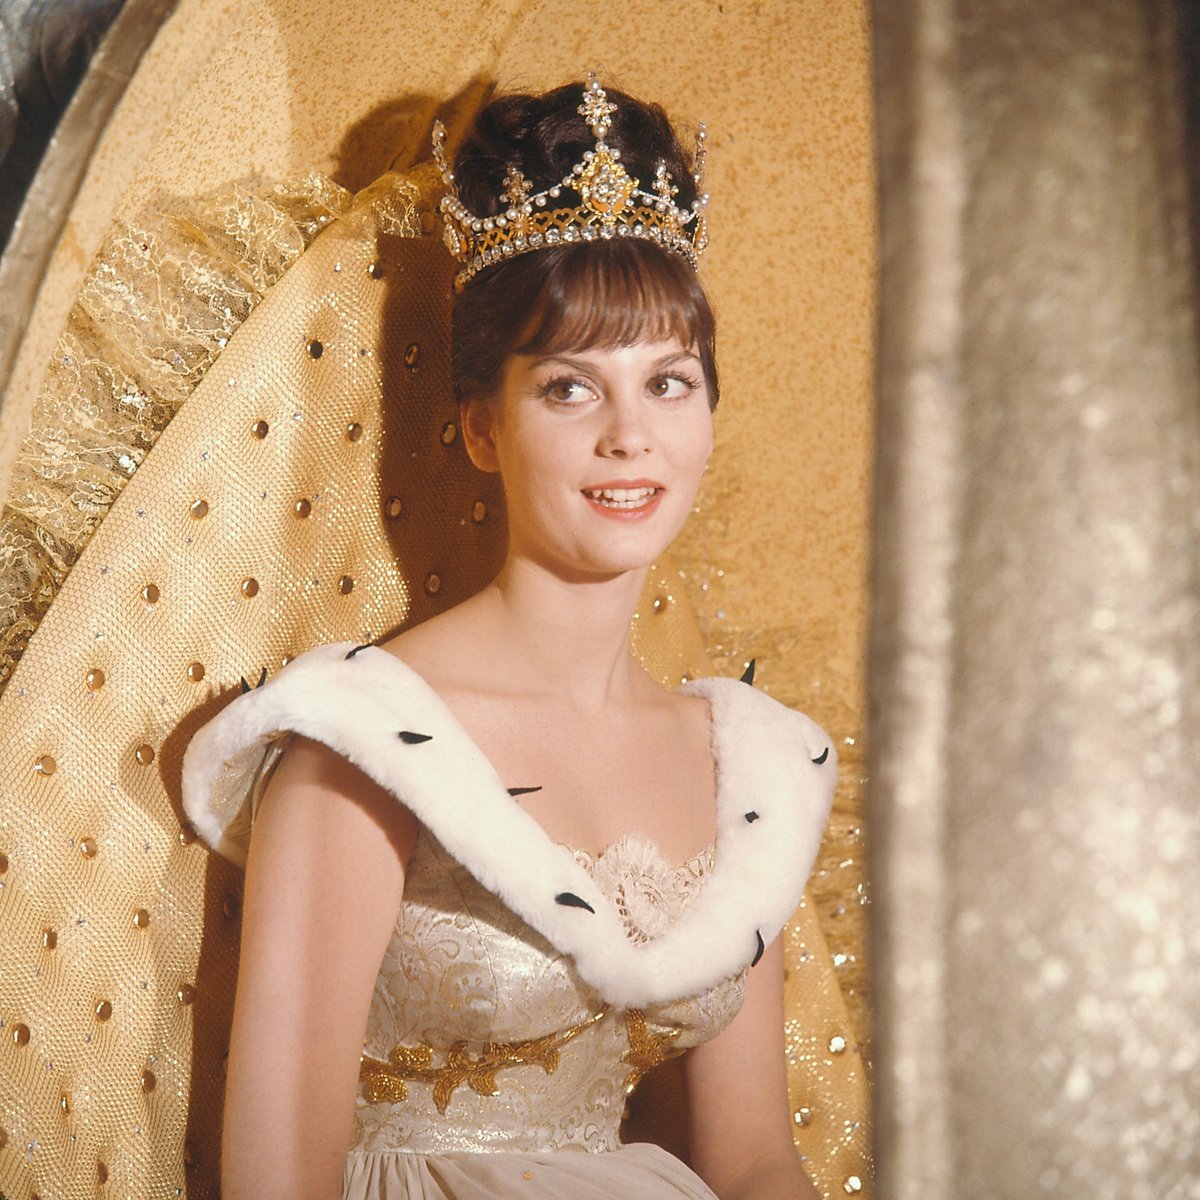 Which song from Rodgers & Hammerstein's Cinderella (1965) do you listen to most often? Vote by tweeting us the emojis below! 🧹 'In My Own Little Corner' 🪄 'Impossible' ⏰ 'Ten Minutes Ago' 💜 'Do I Love You Because You're Beautiful?' ✨ 'A Lovely Night' Photo: CBS/Photofest